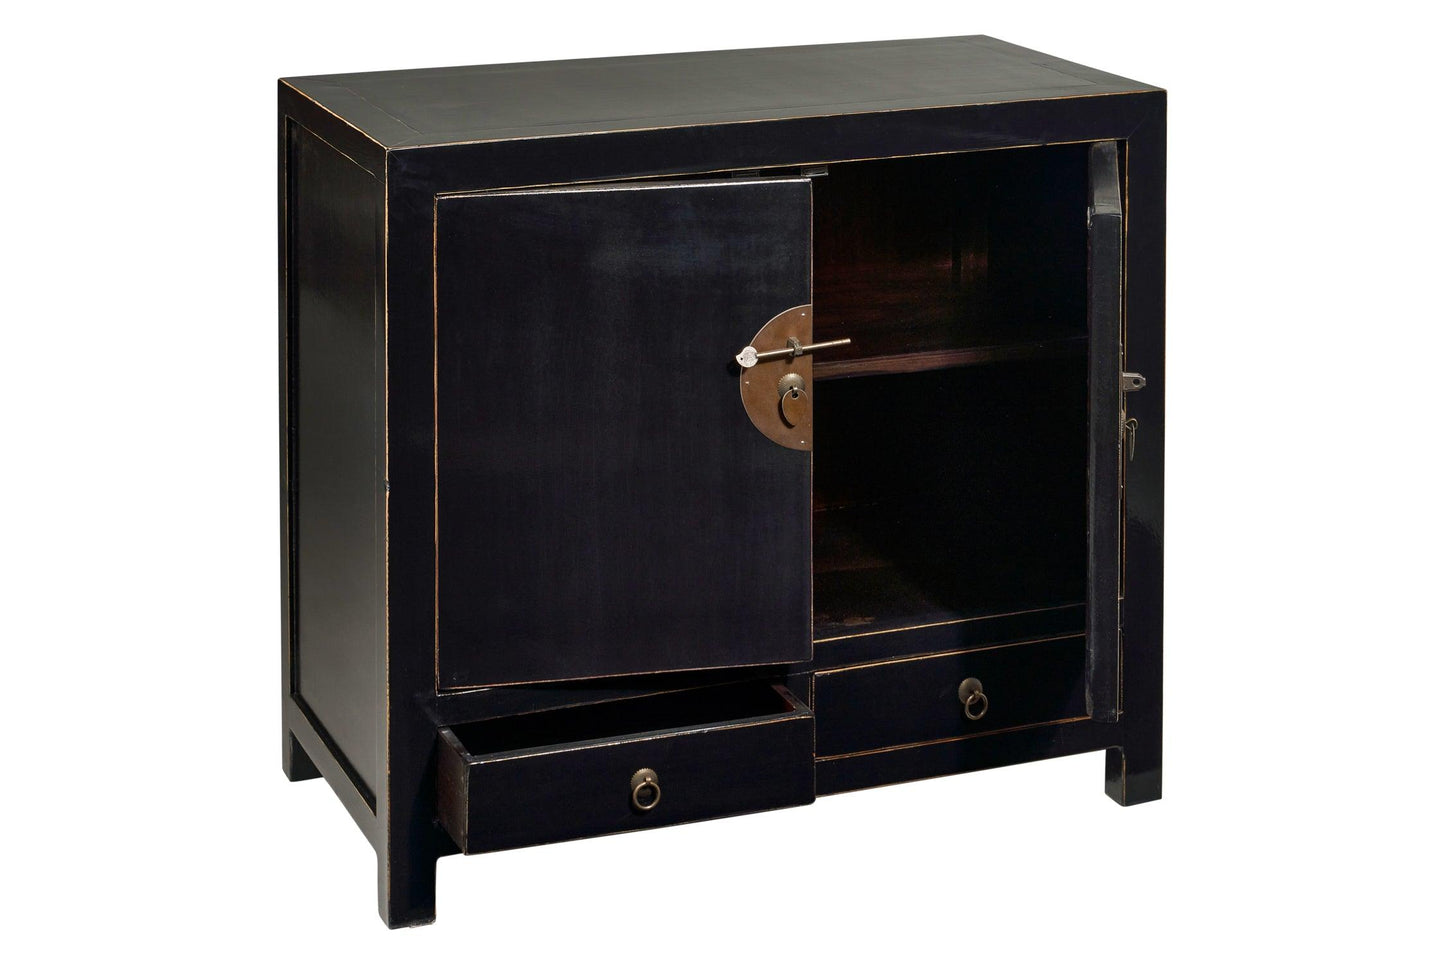 Credenza cinese in Olmo lacca nera 2a 2c - lapagoda.net